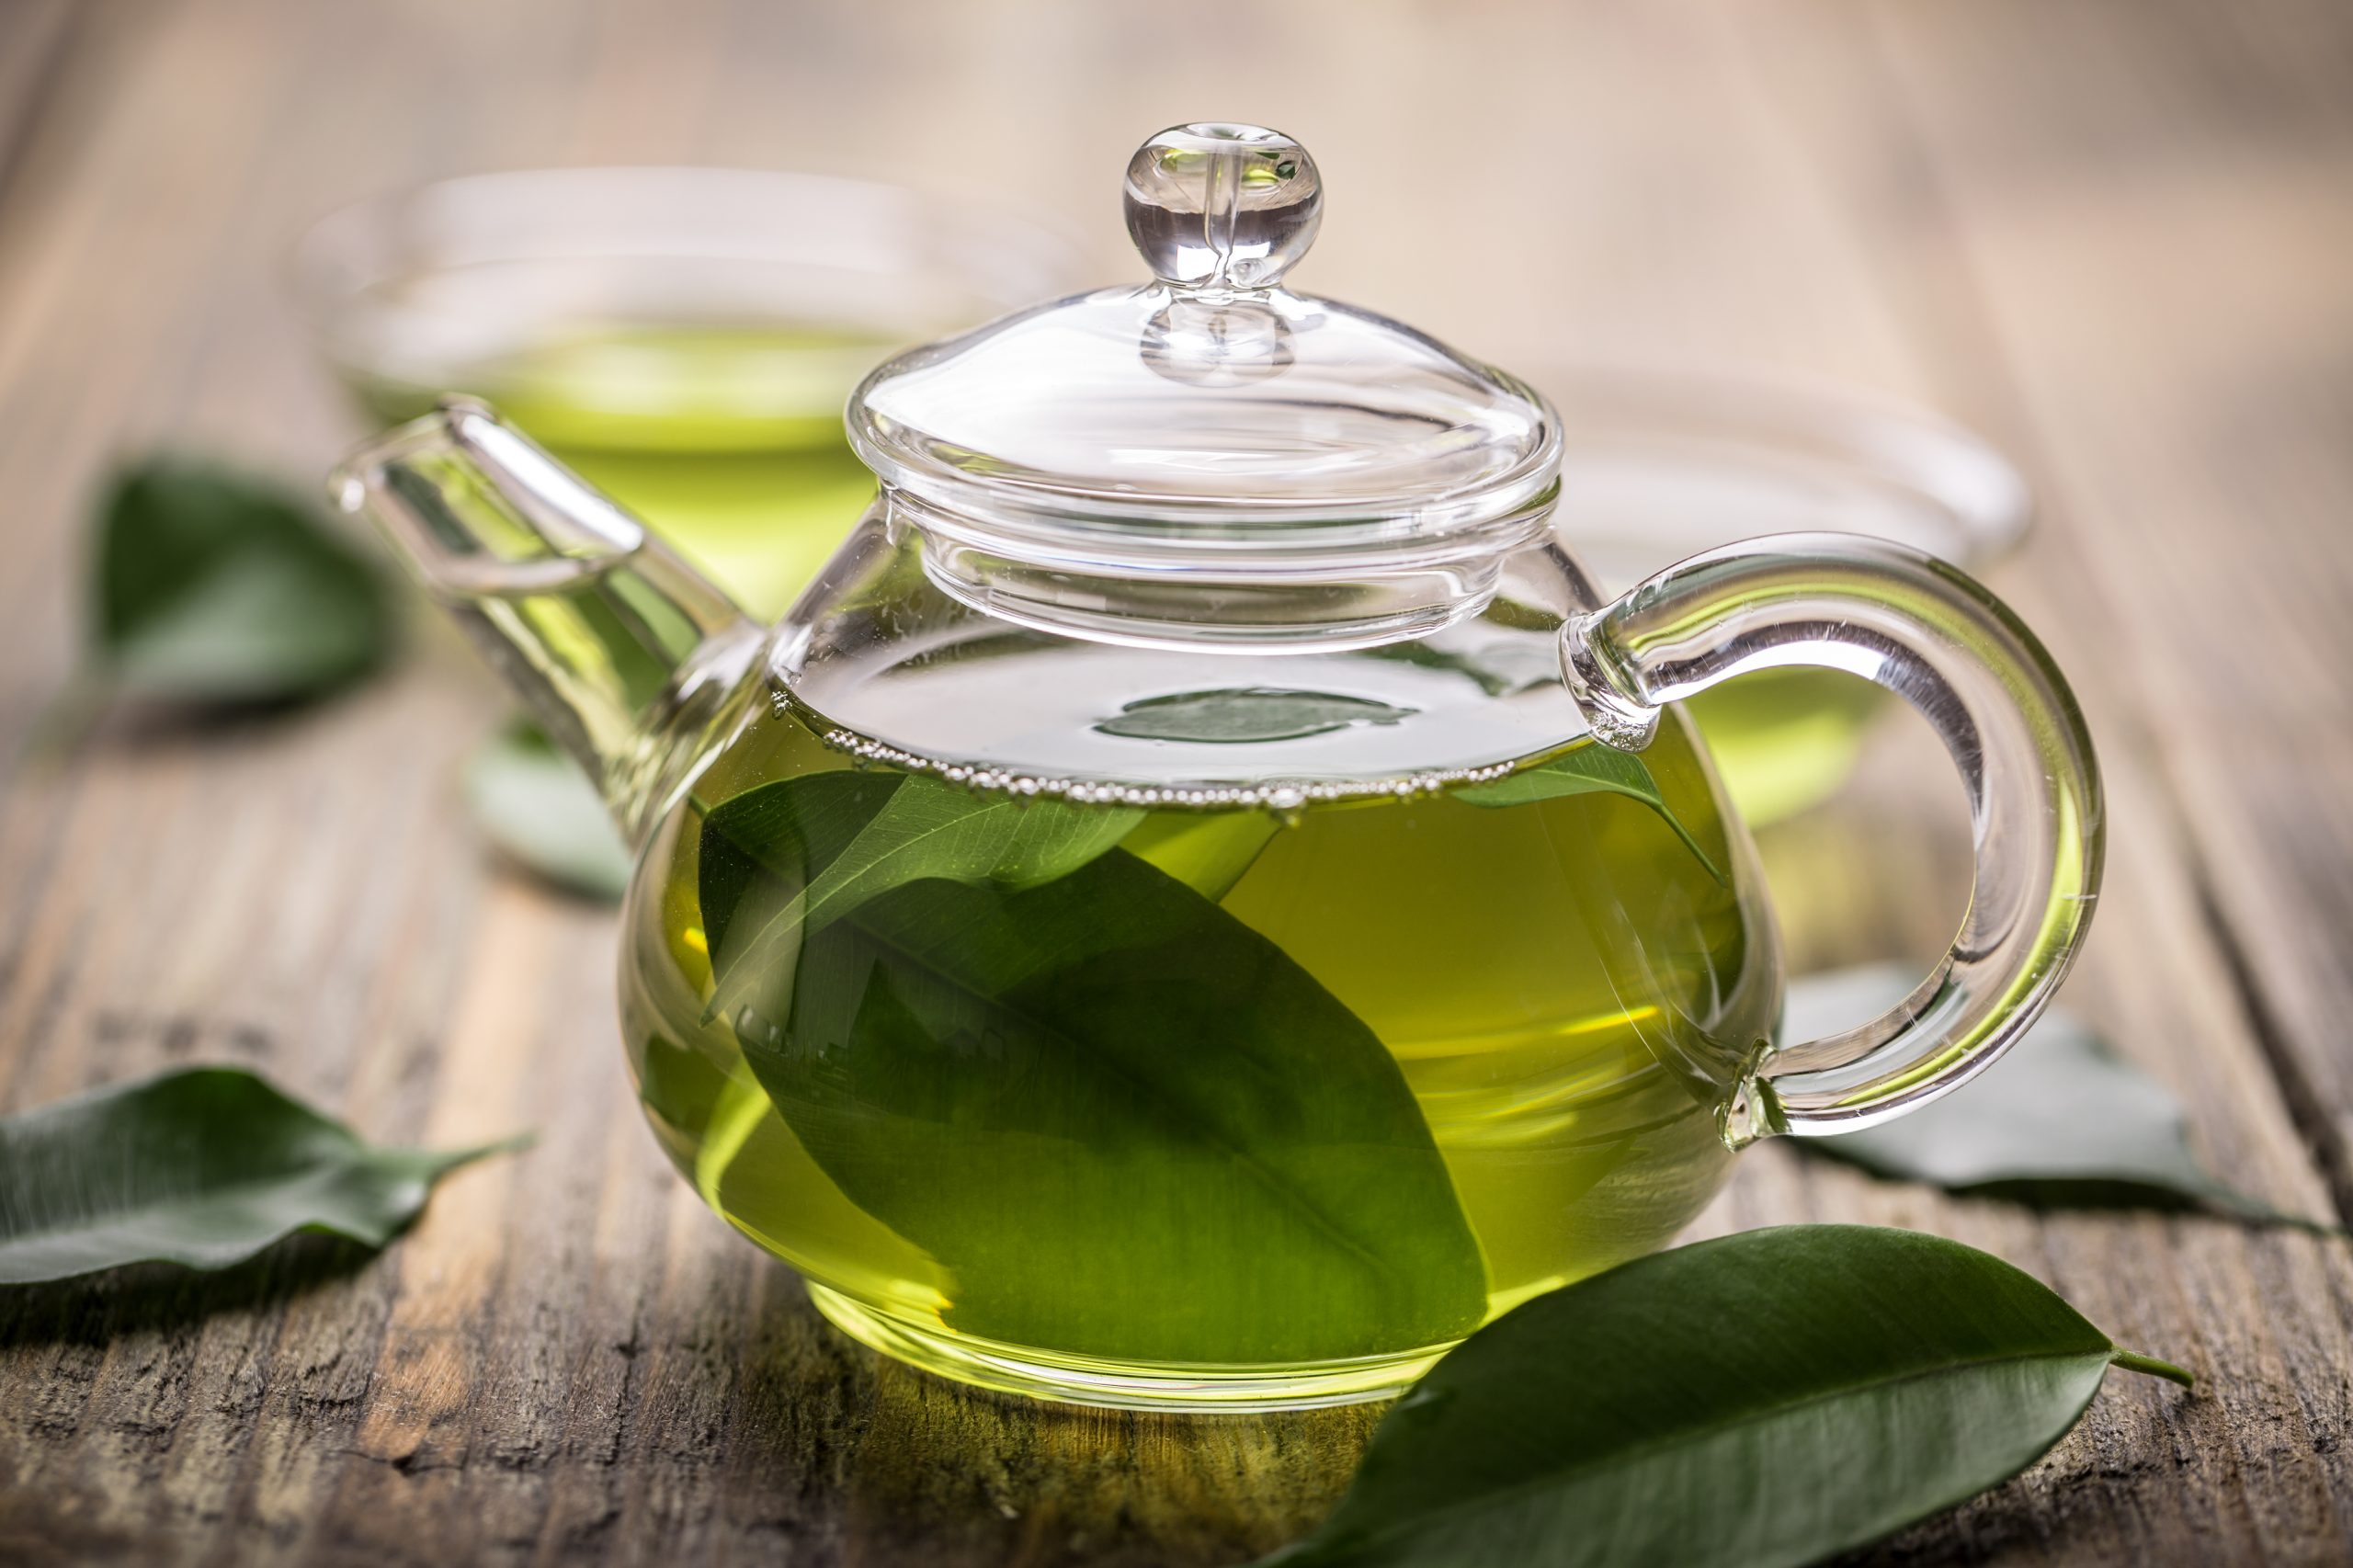 Organic Green Tea: A Pure Source of Antioxidants and Other Health Benefits